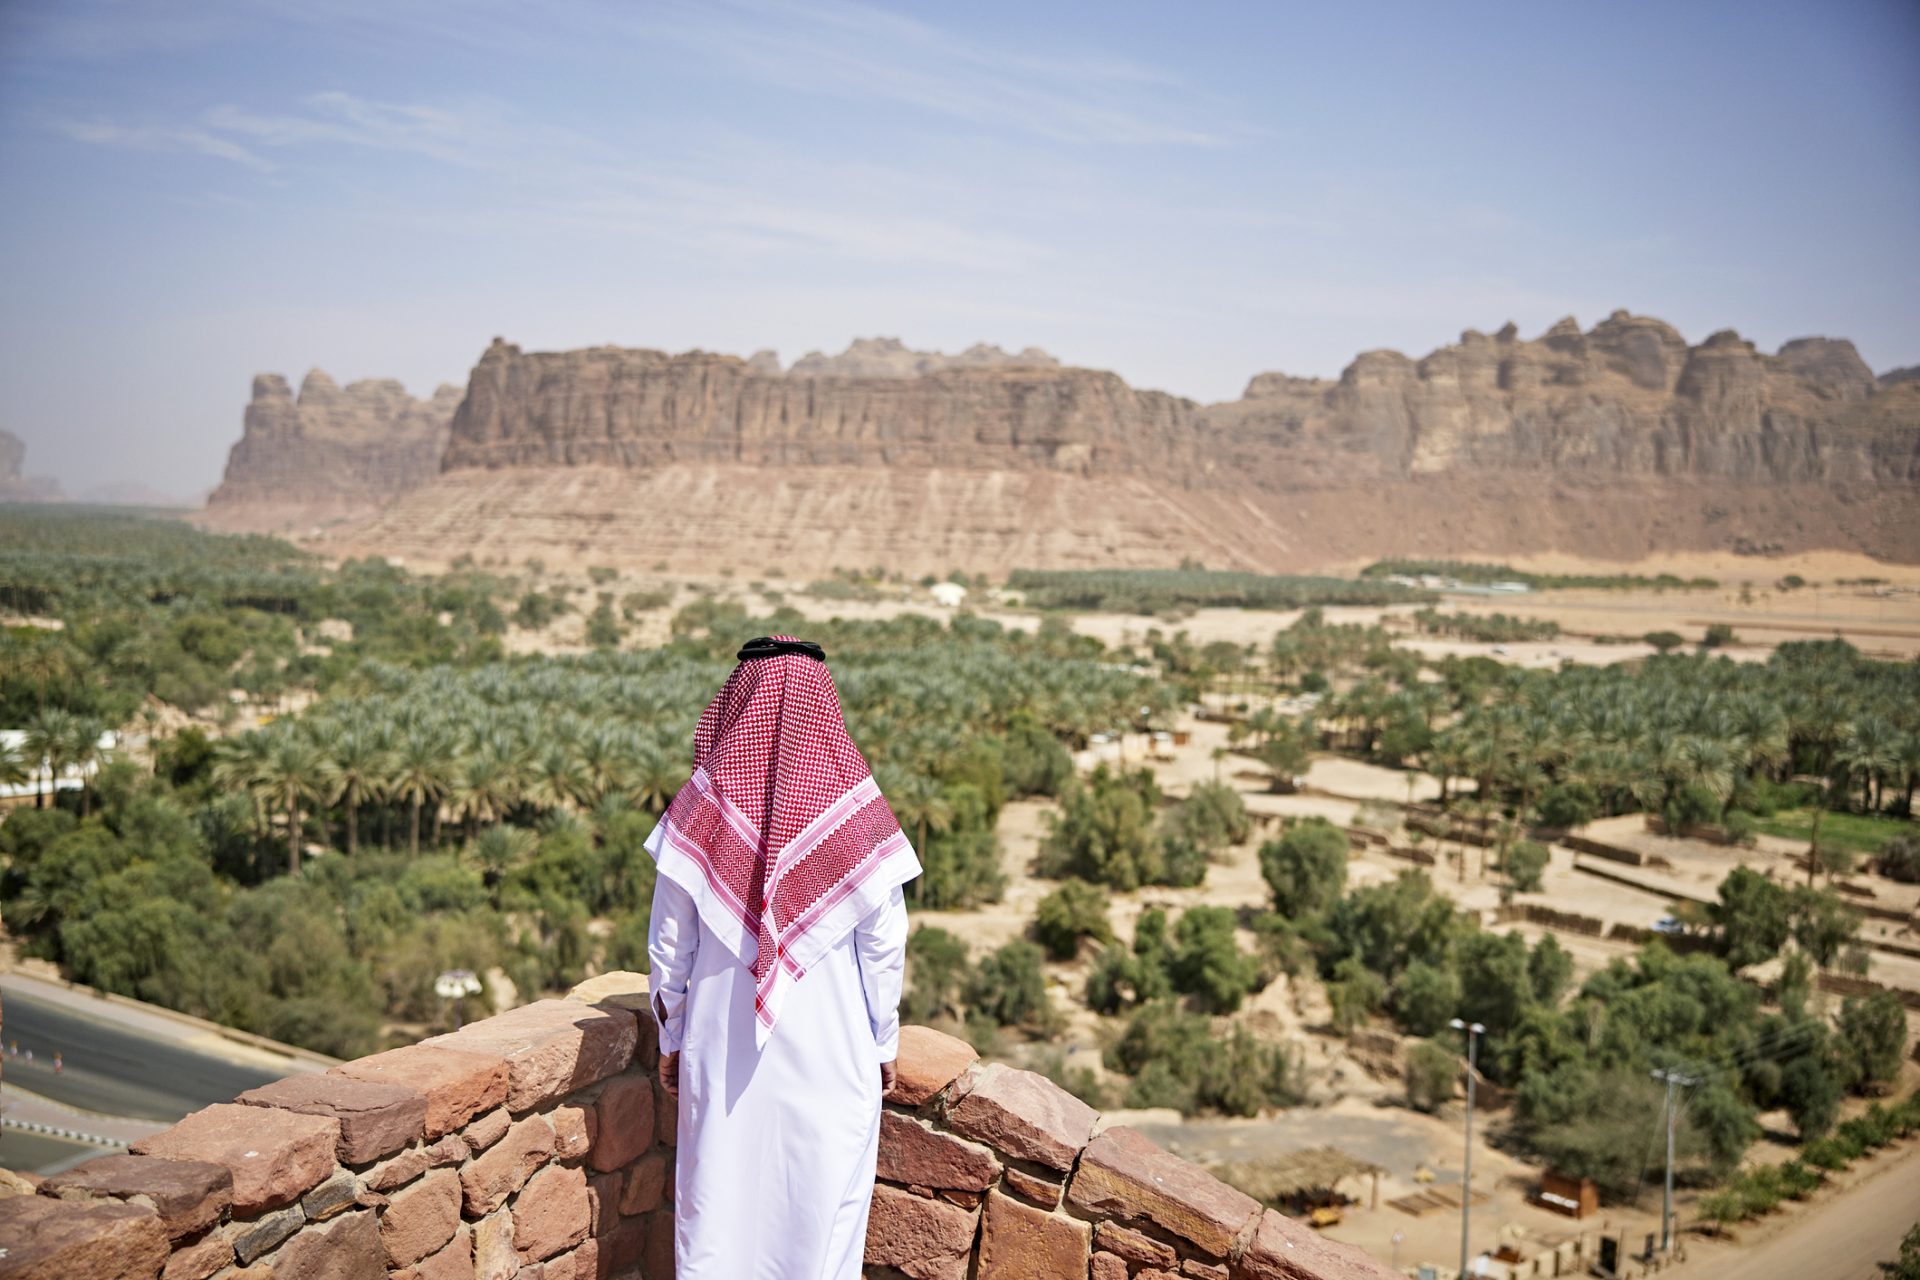 A Saudi company abusing water rights in the US lost its leases